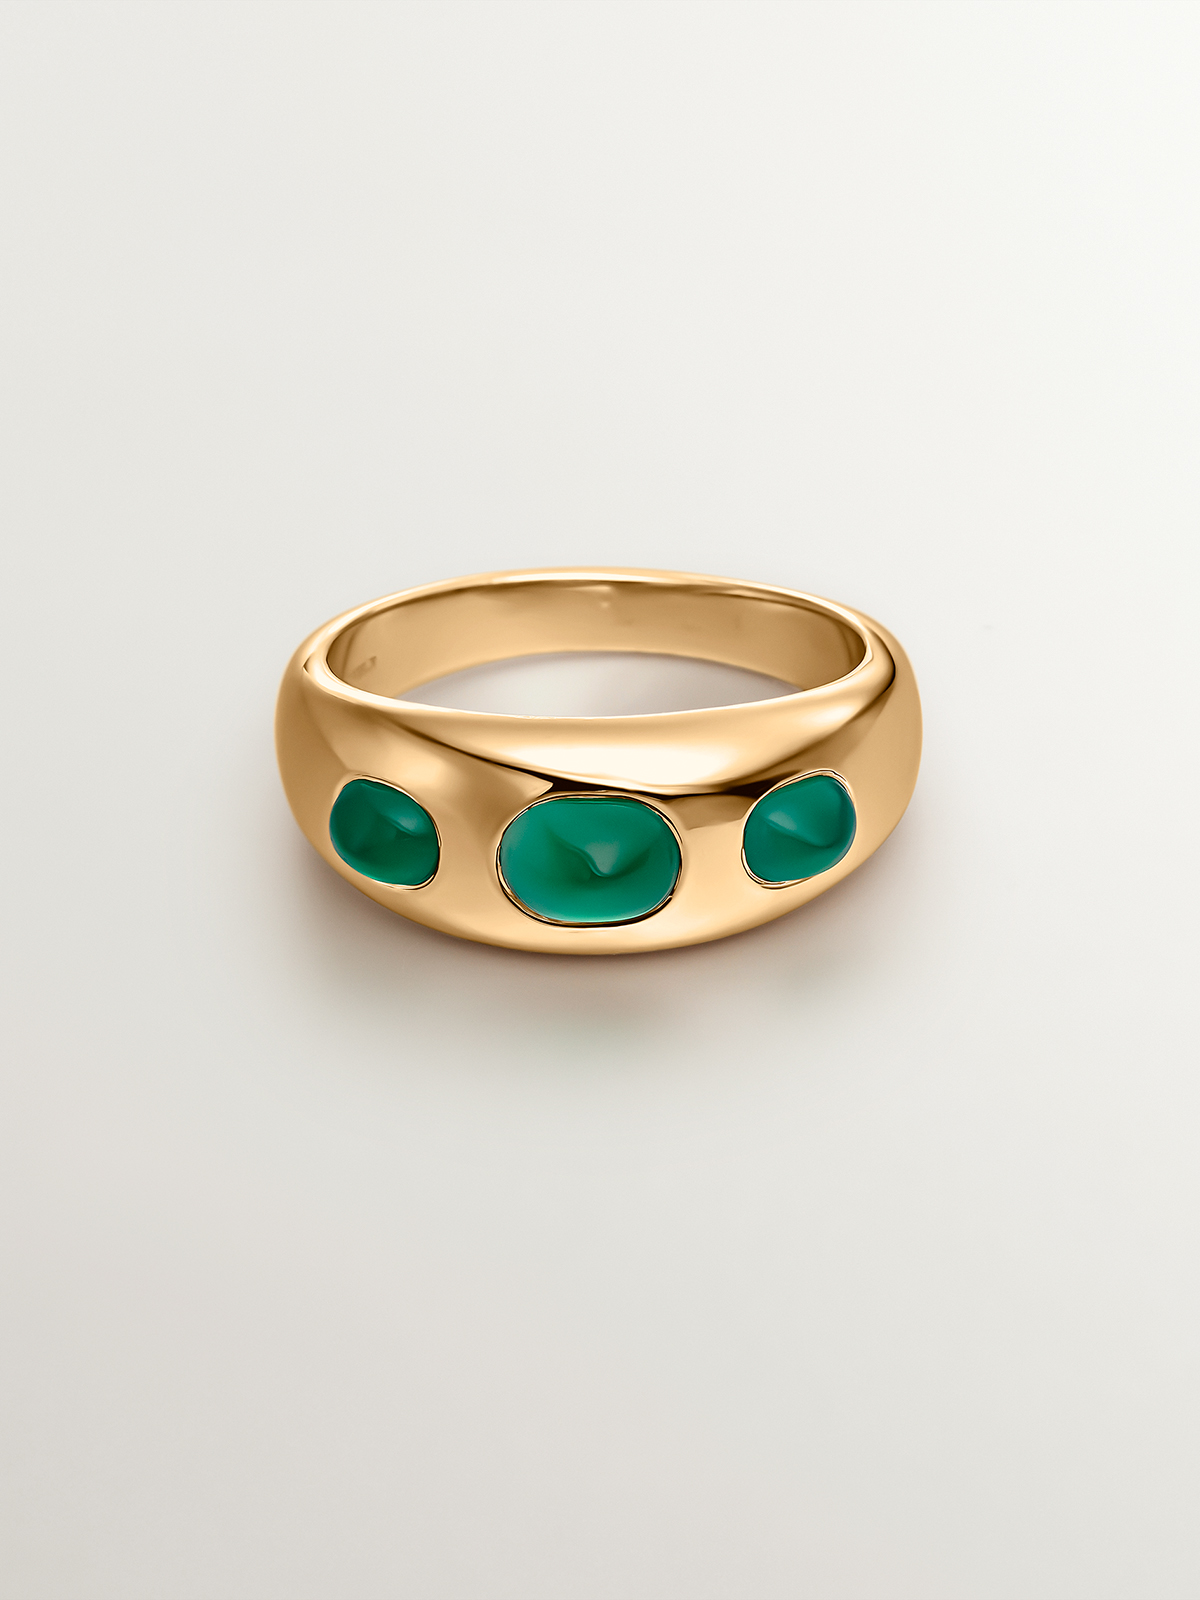 925 silver ring bathed in 18k yellow gold with green chalcedony